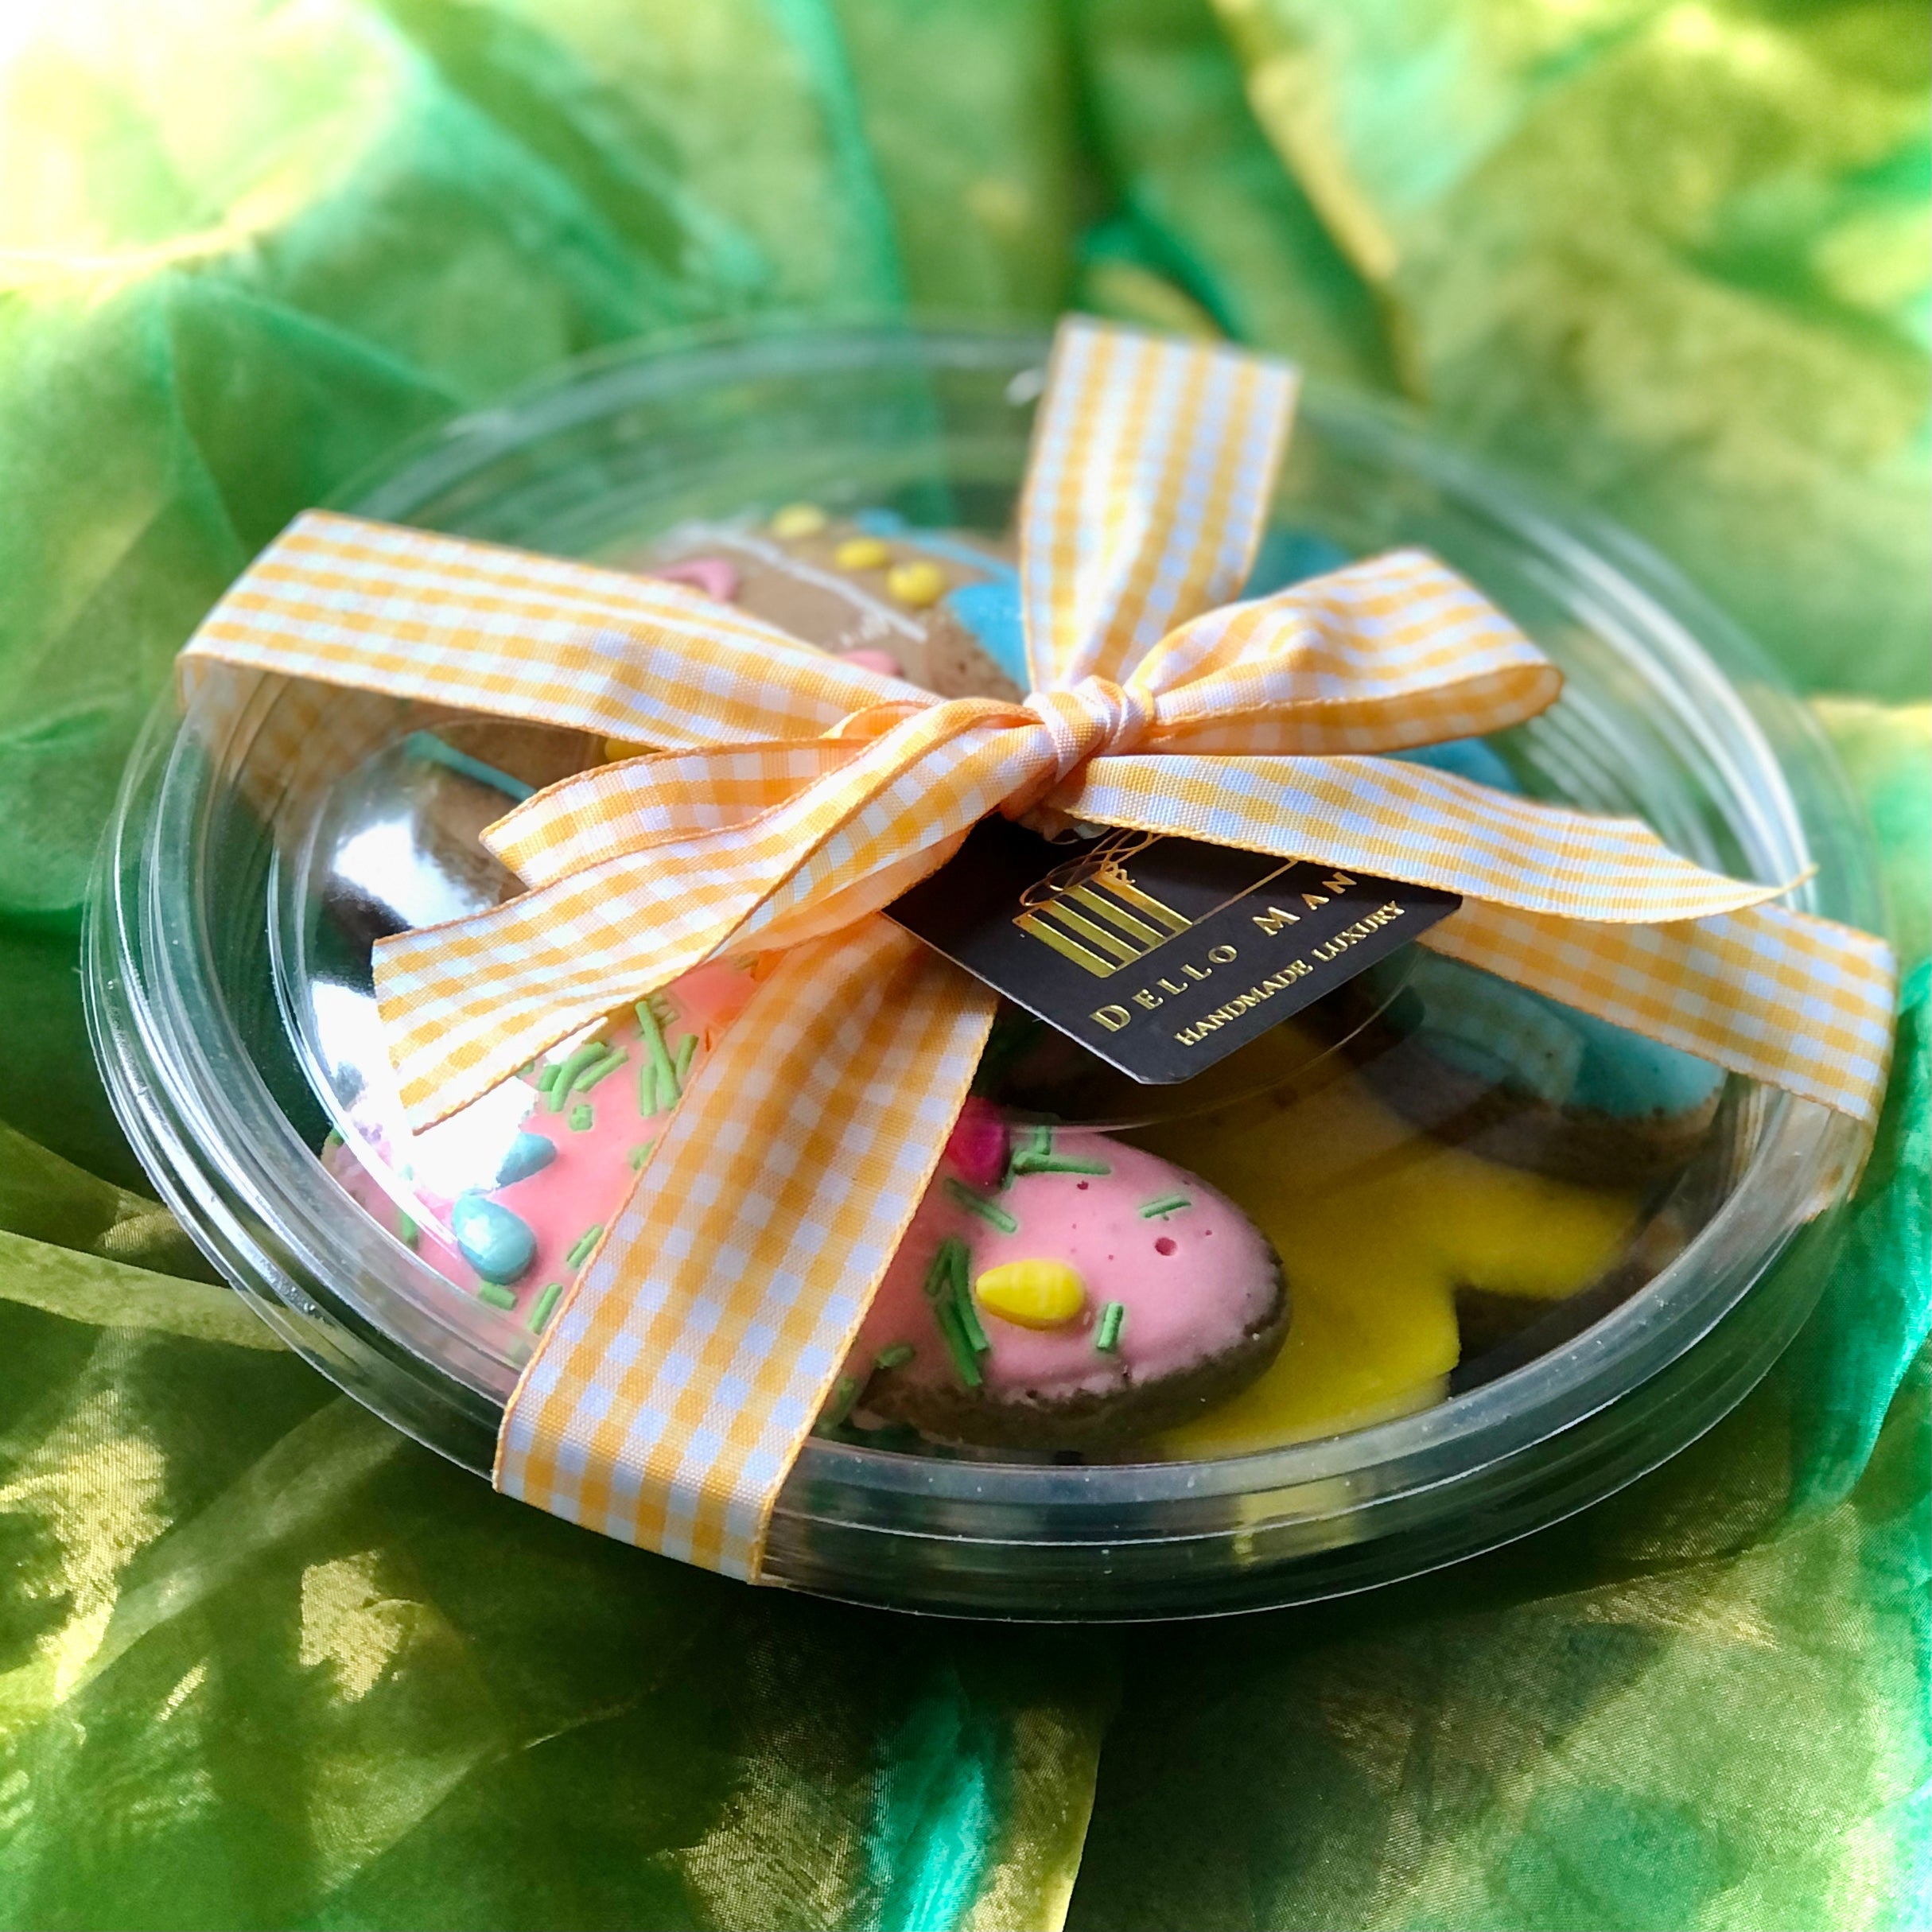 A gift box of easter cookies finished with ribbon and bow on a green fabric background